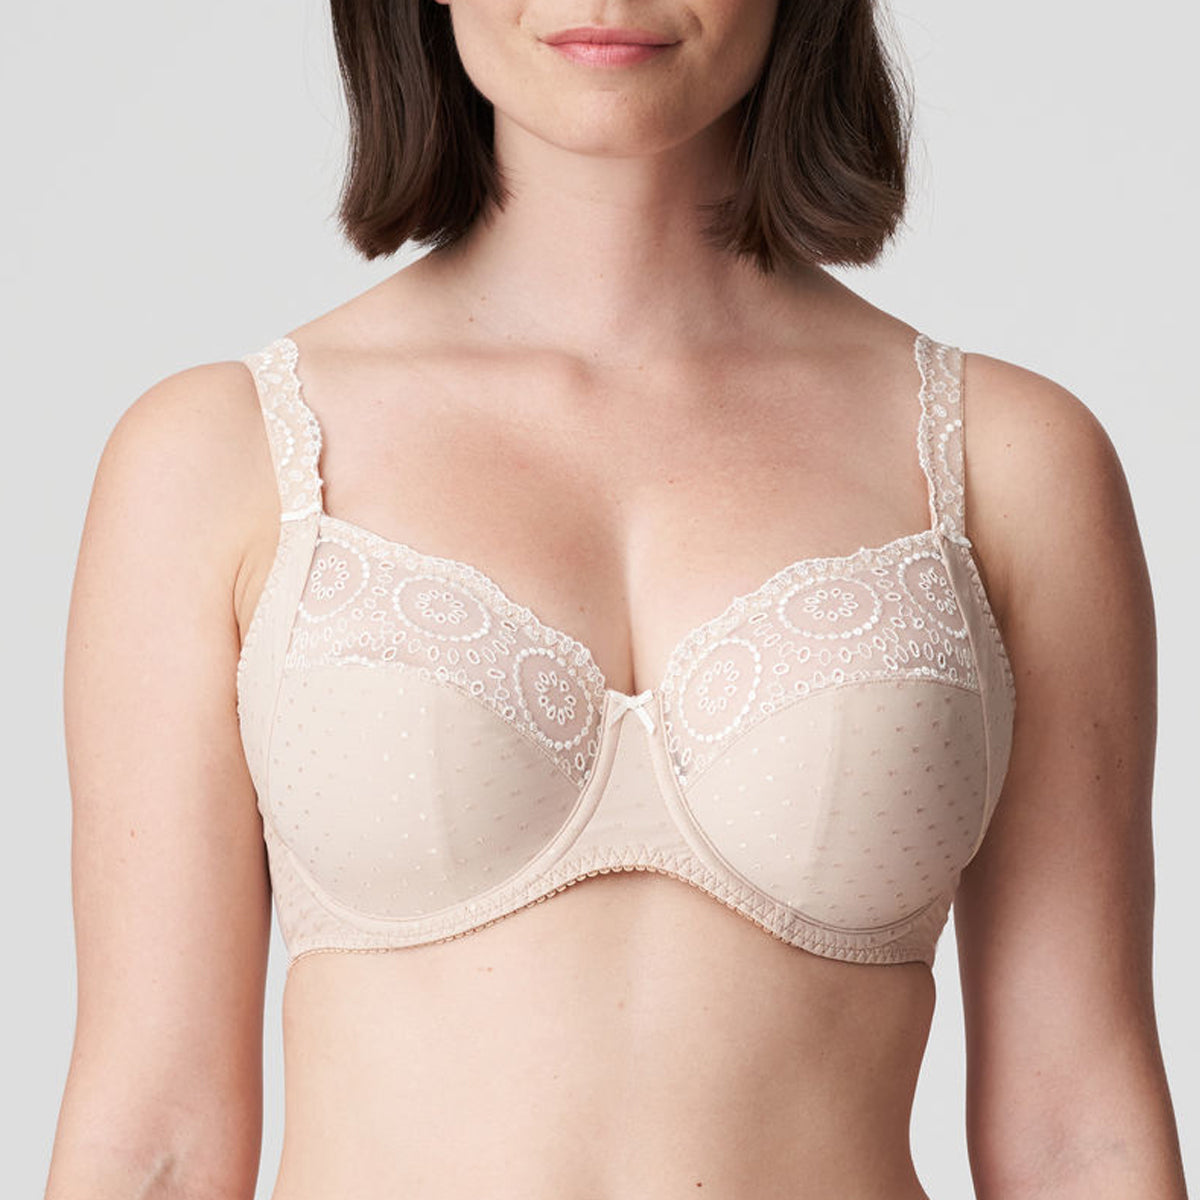 Nude opaque plunging underwire full cup bra, AGATHE